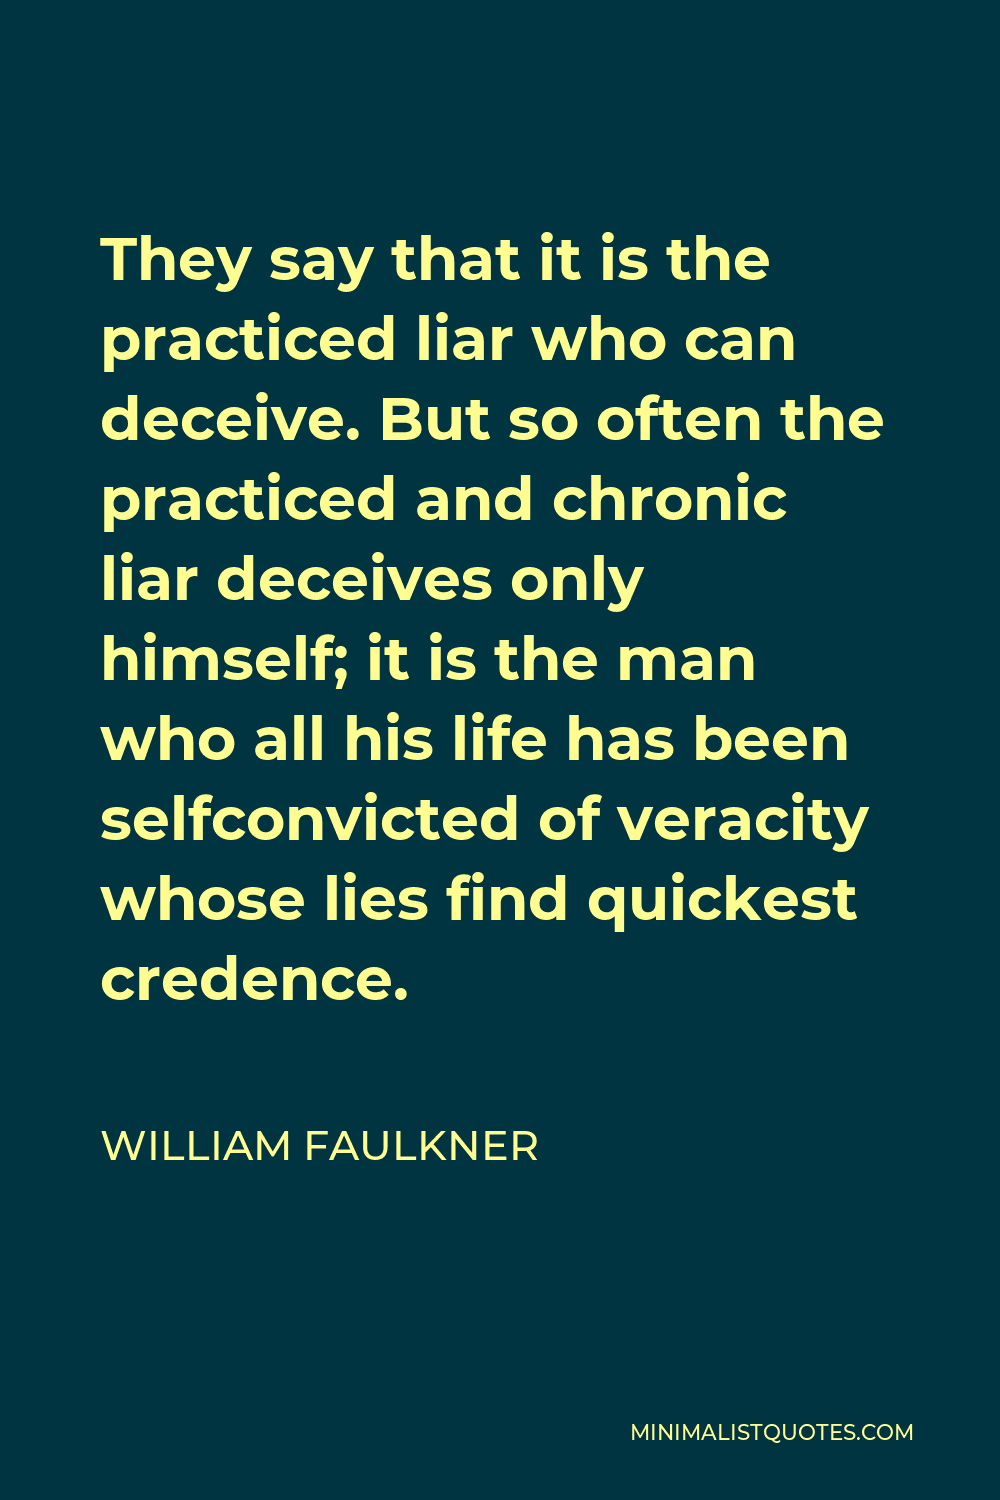 William Faulkner Quote - They say that it is the practiced liar who can deceive. But so often the practiced and chronic liar deceives only himself; it is the man who all his life has been selfconvicted of veracity whose lies find quickest credence.